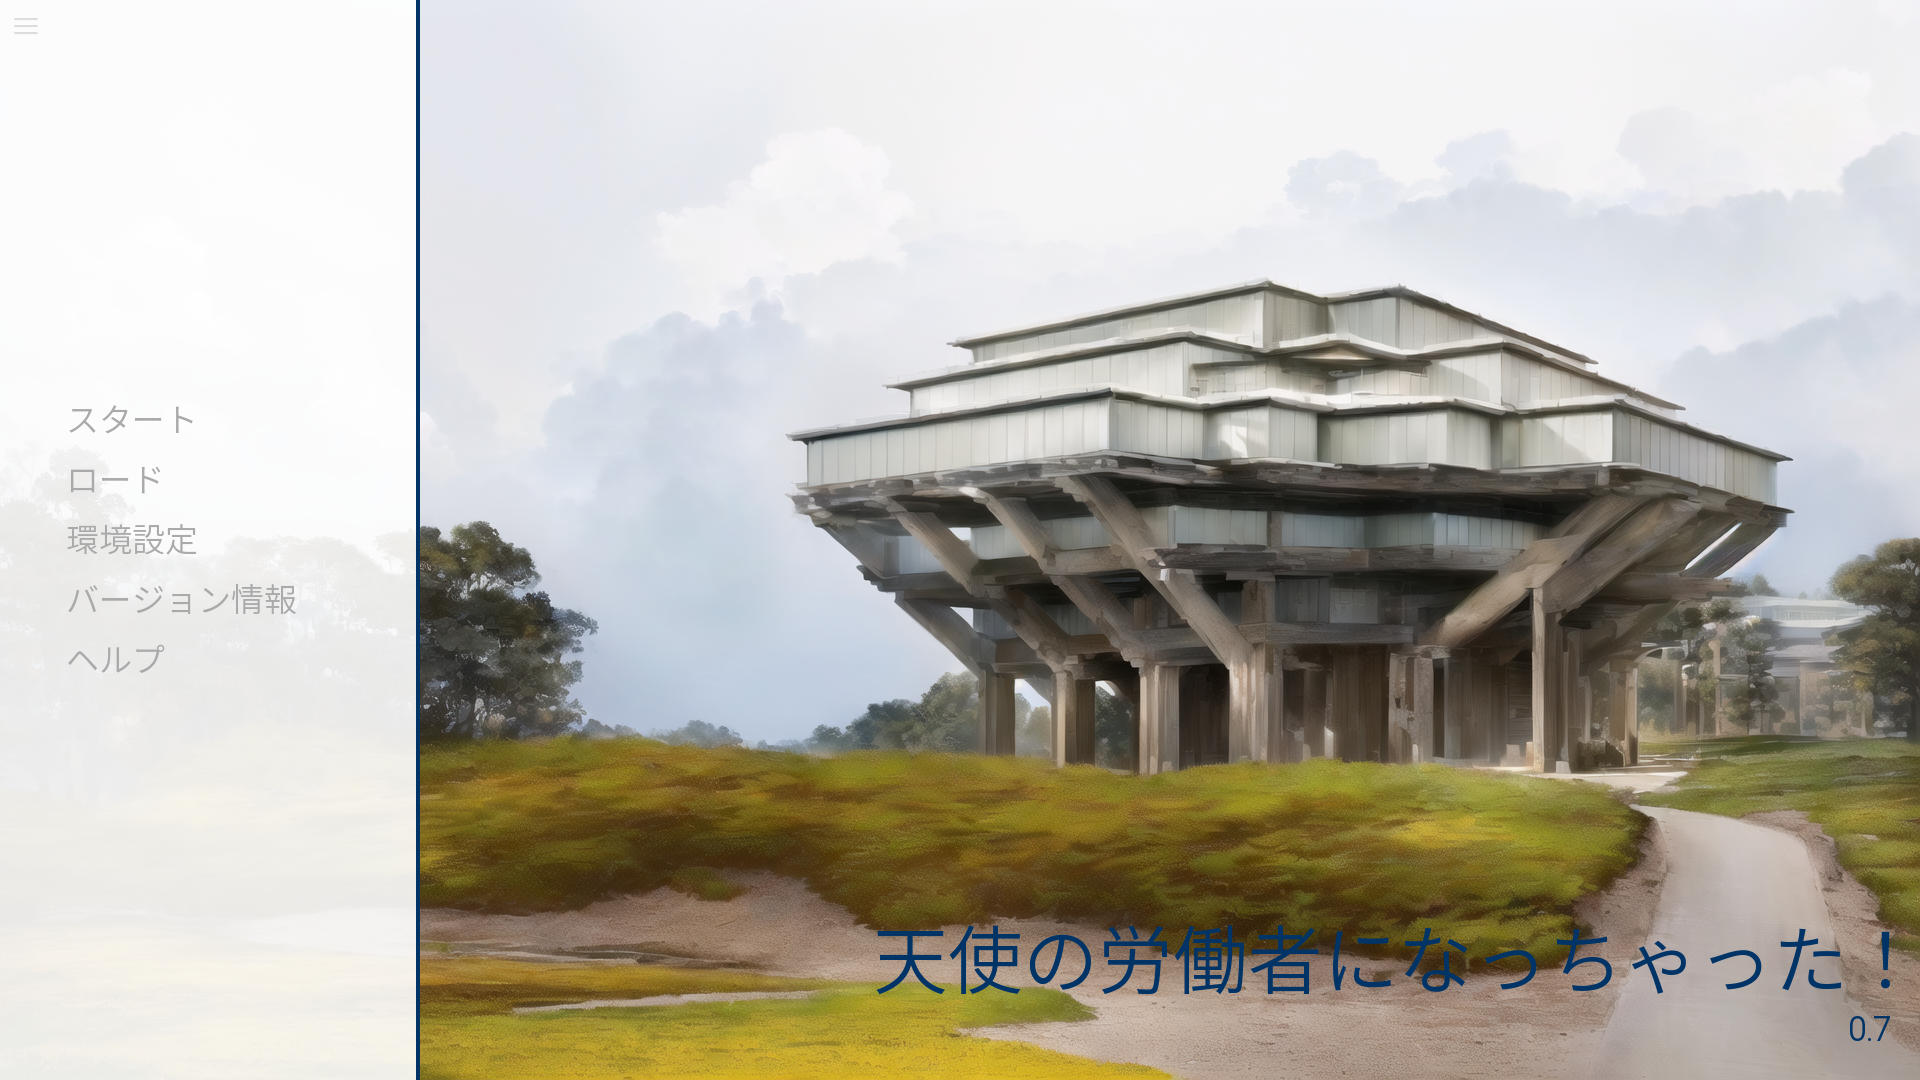 Screenshot of the Novel Game's start screen showing Geisel Library, a game menu and the game's title 天使の労働者になっちゃった！